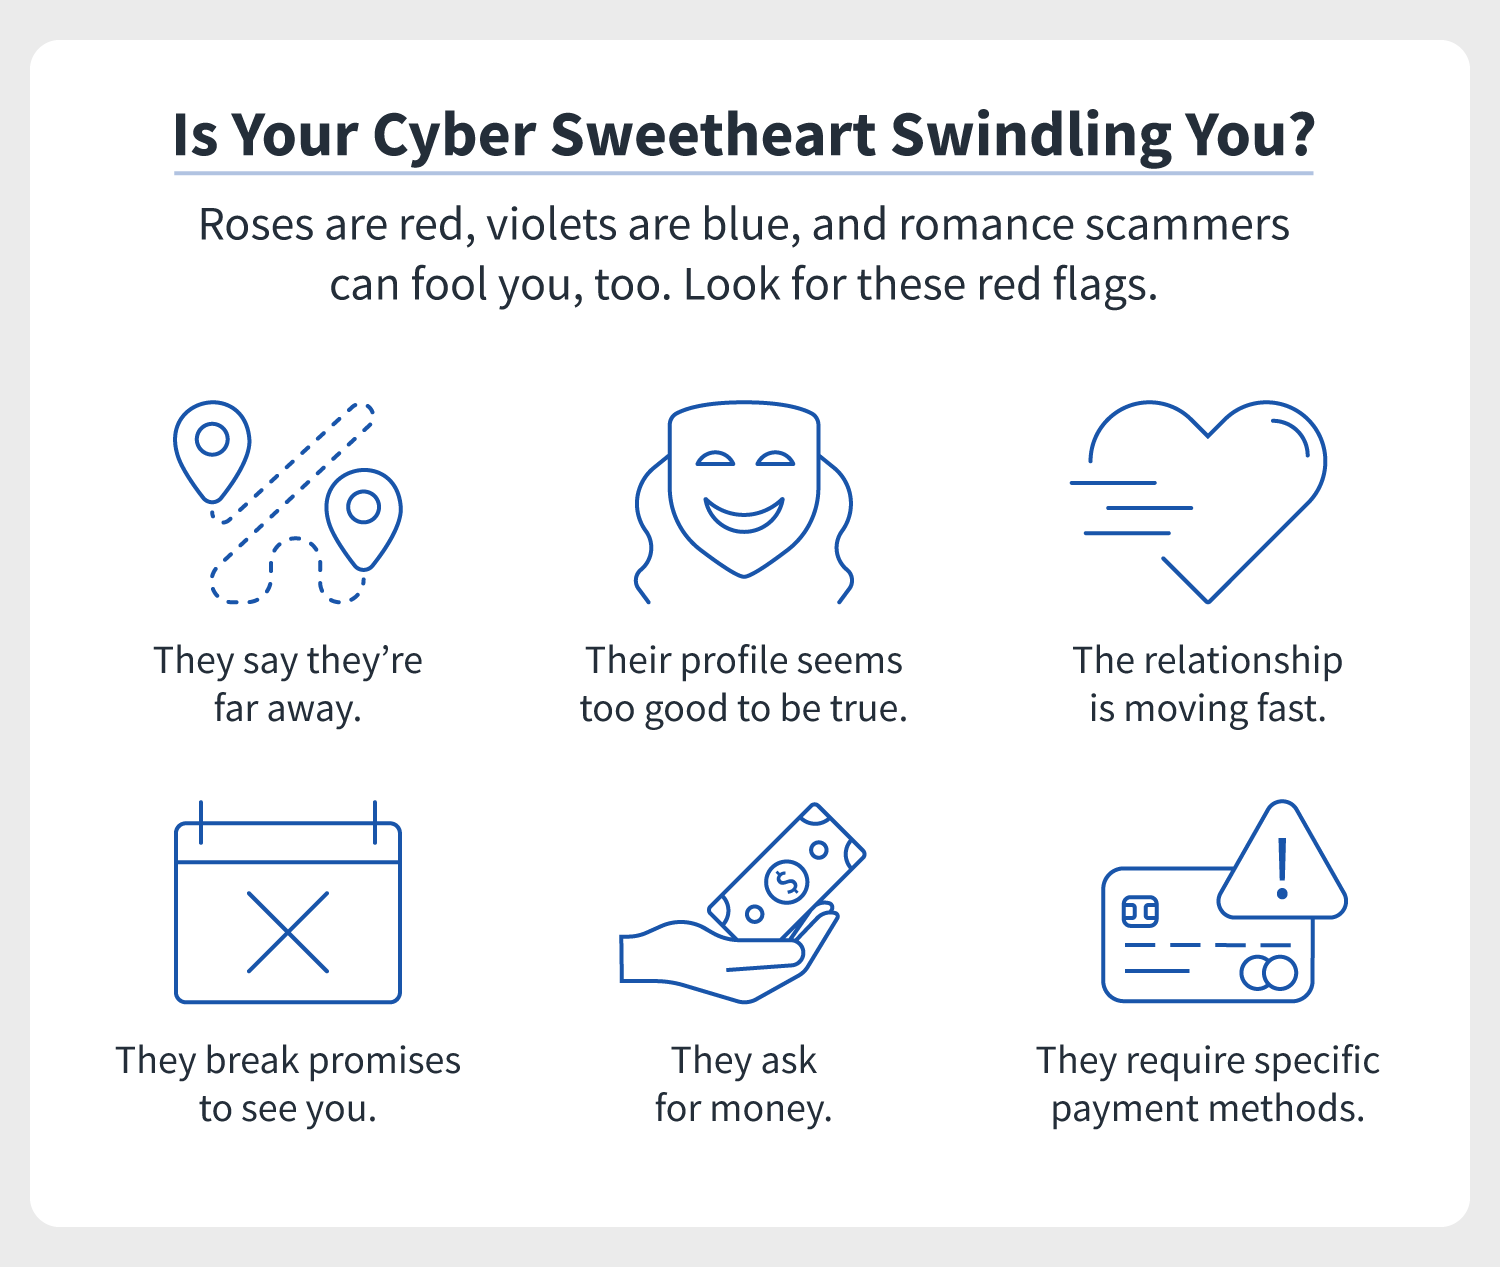 Romance scam pictures -0 no sign up dating sites australia